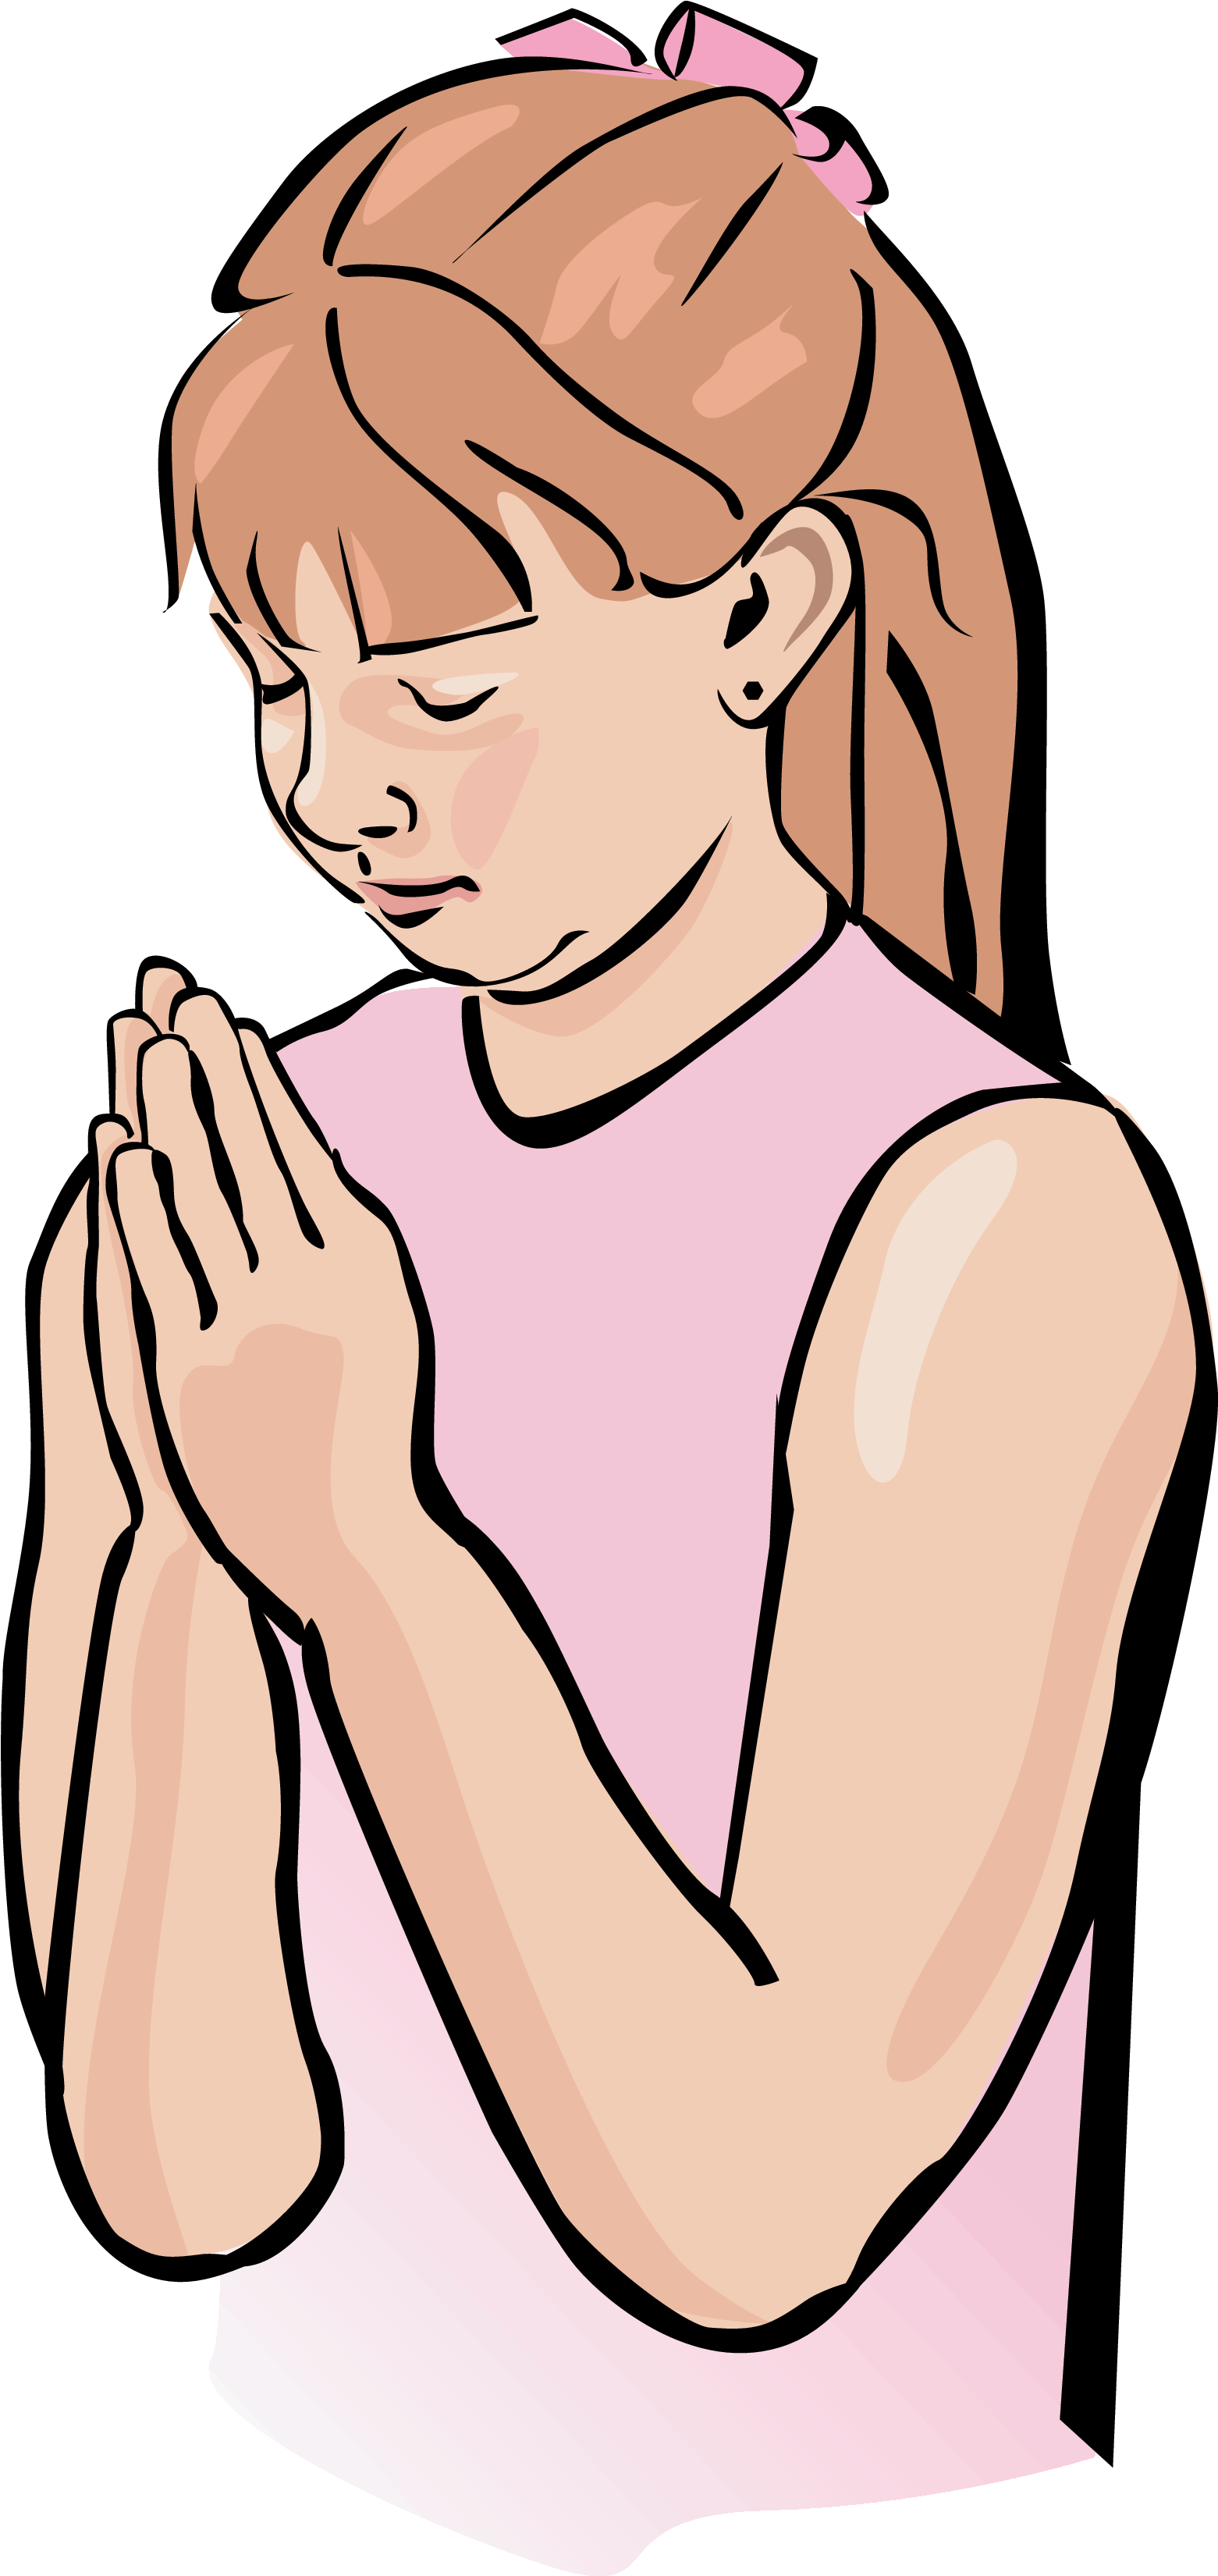 Child Prayer Clipart Free Clipart Images - Psychic (1571x3300)